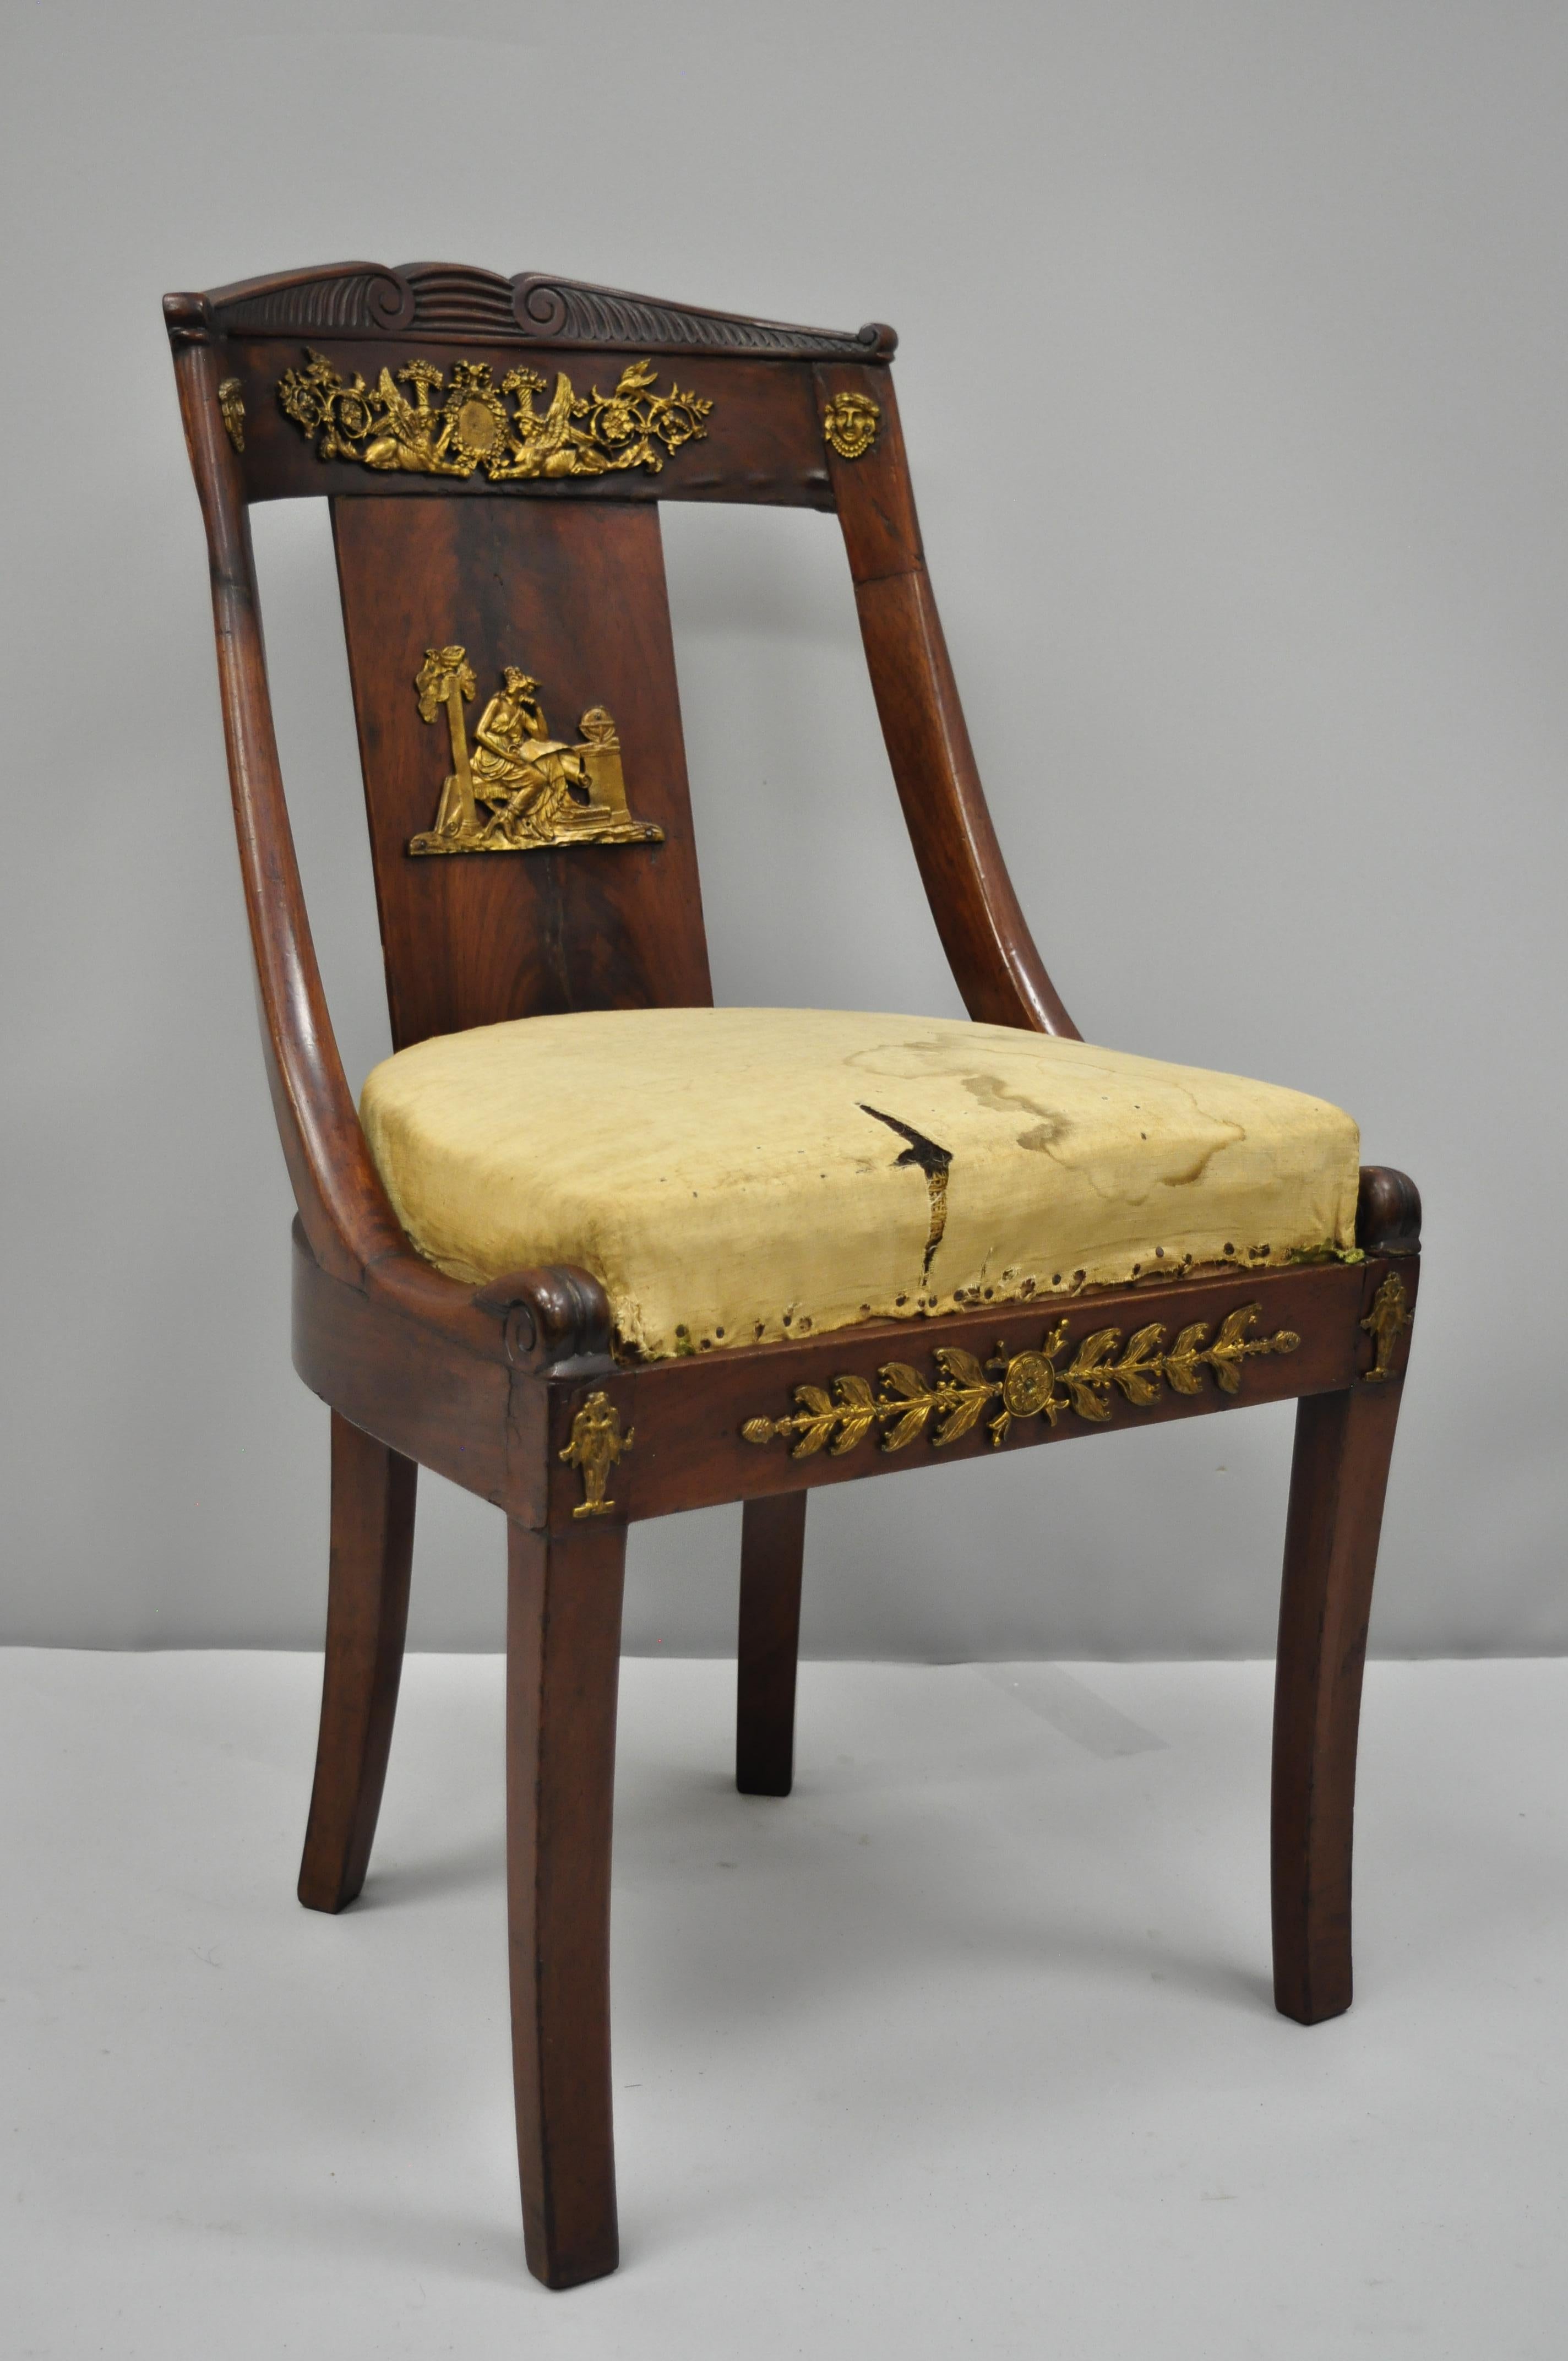 Early 19th century mahogany side chair with bronze ormolu. Item features finely cast bronze ormolu, rounded back with carved top rail, beautiful crotch mahogany veneer, drop seat with horse hair fill, solid mahogany construction, nicely carved